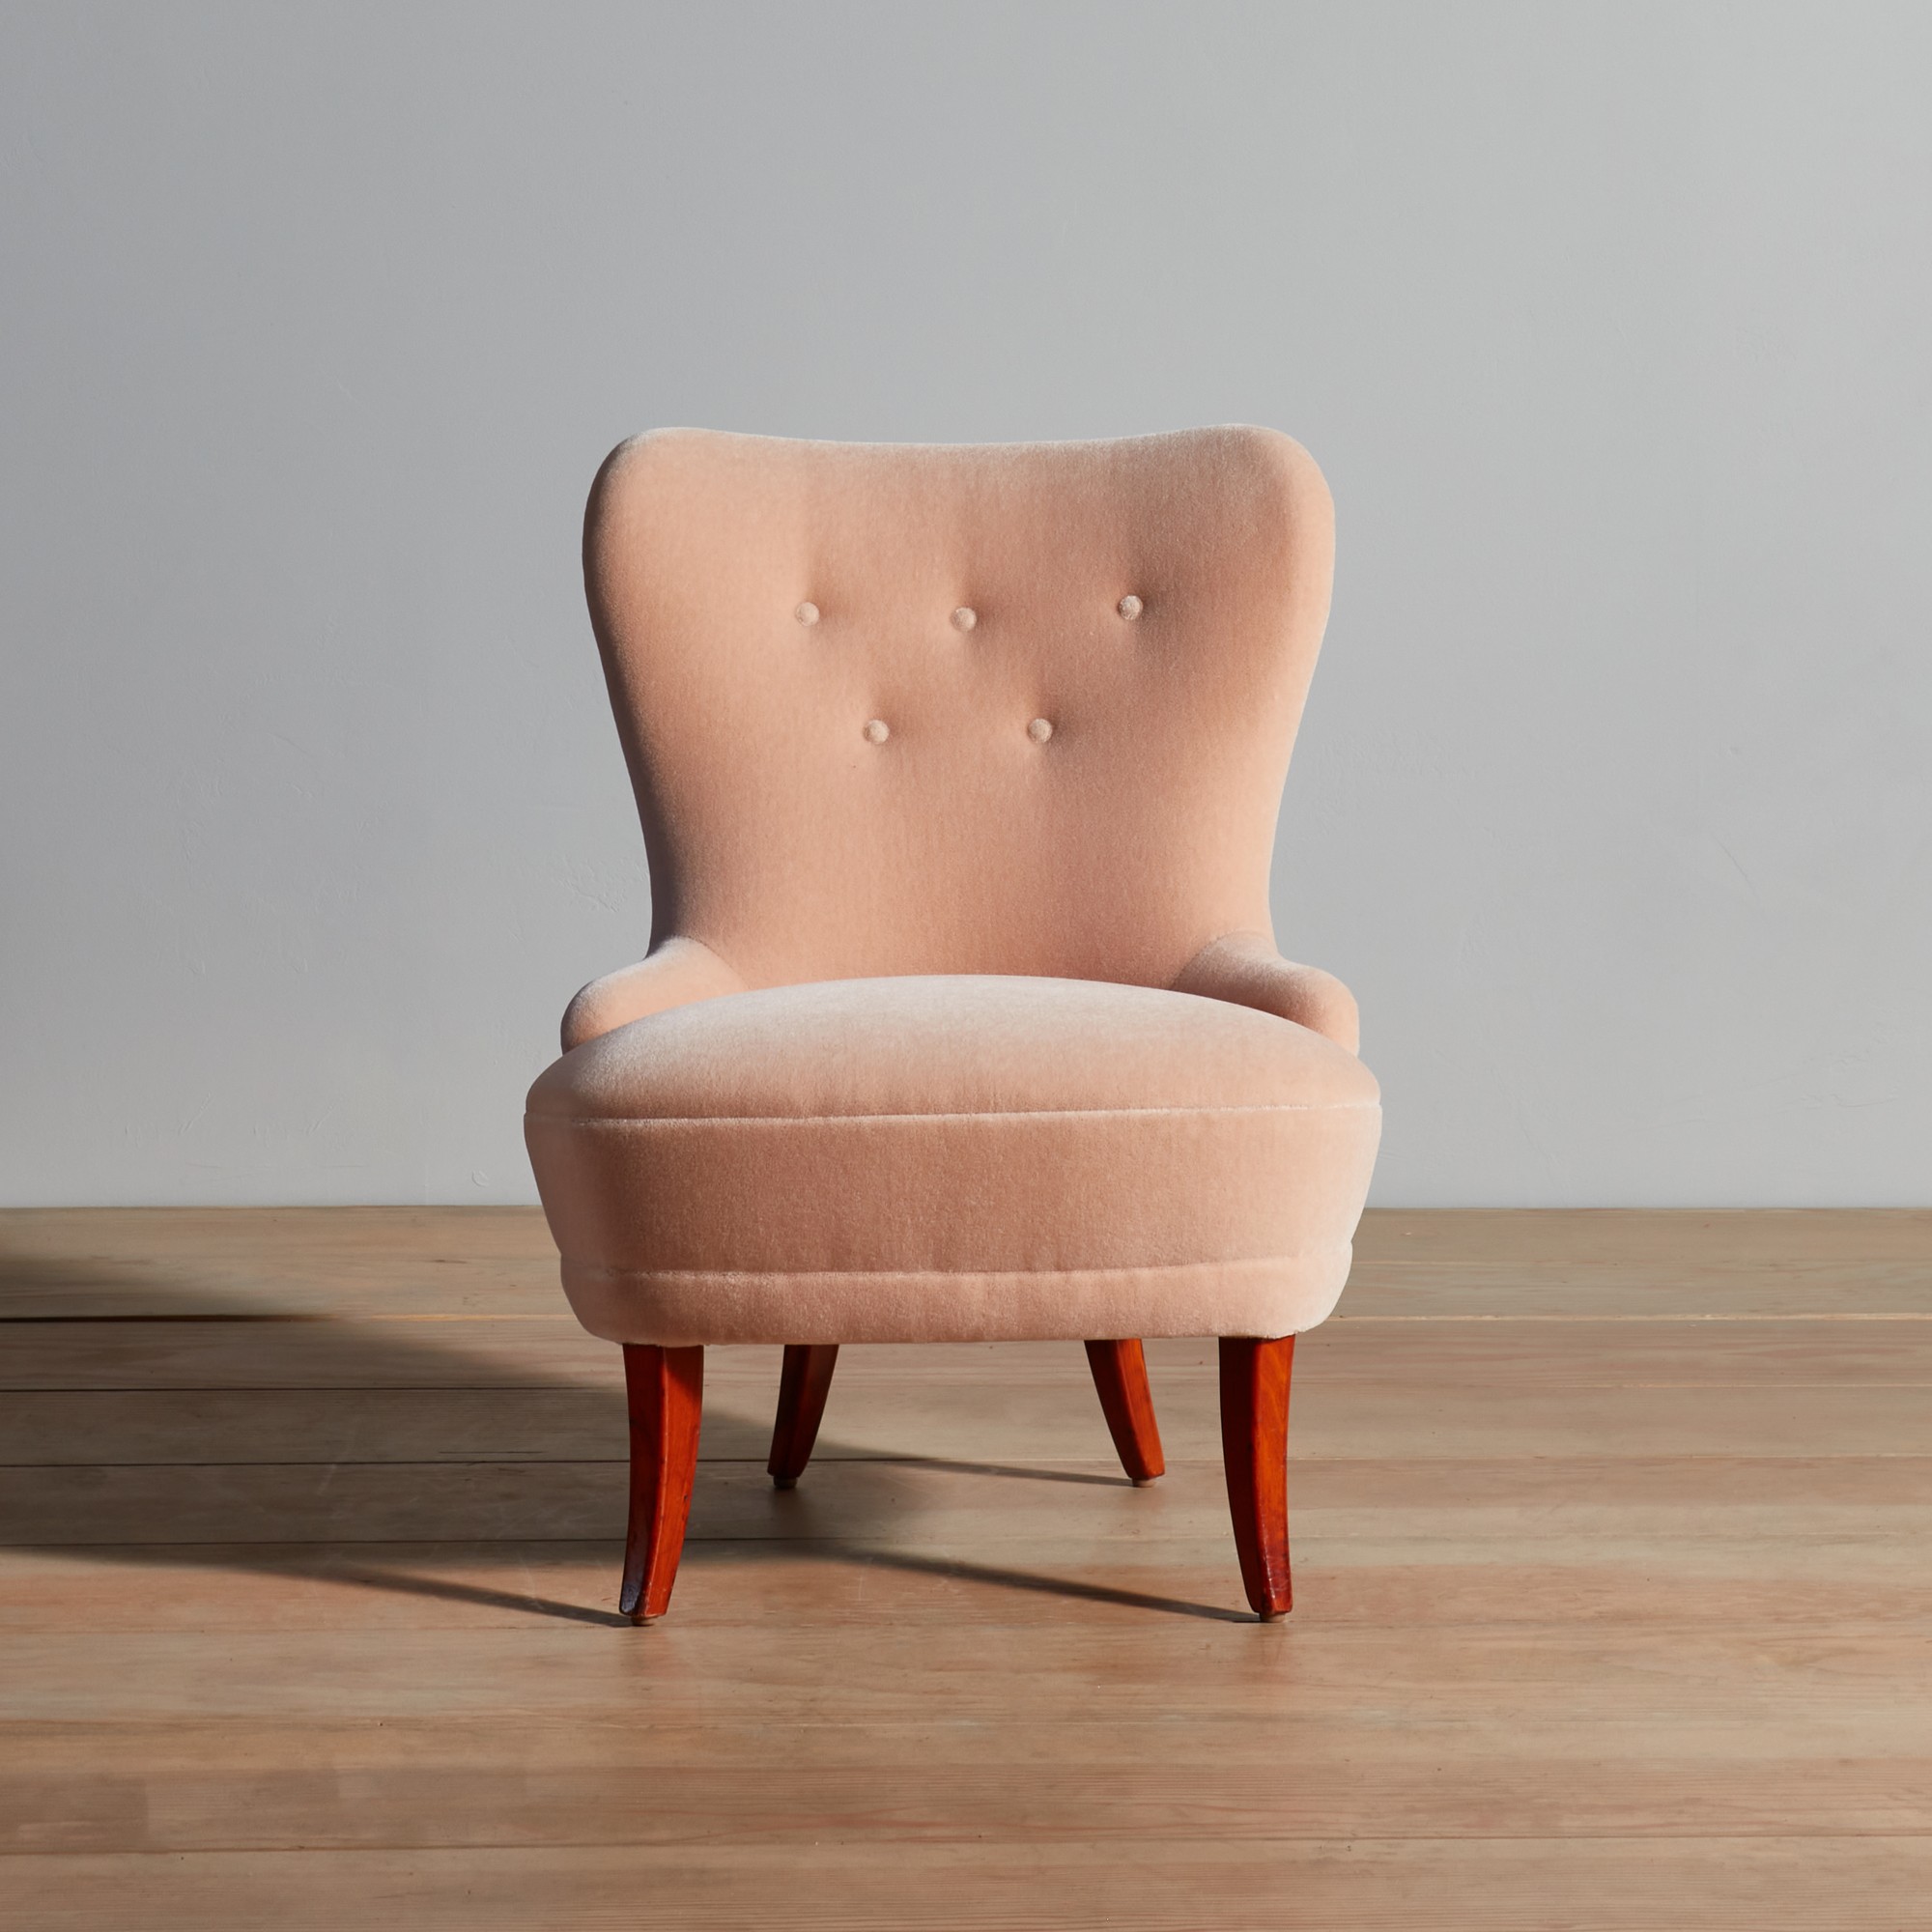 a pink chair sitting on top of a wooden floor